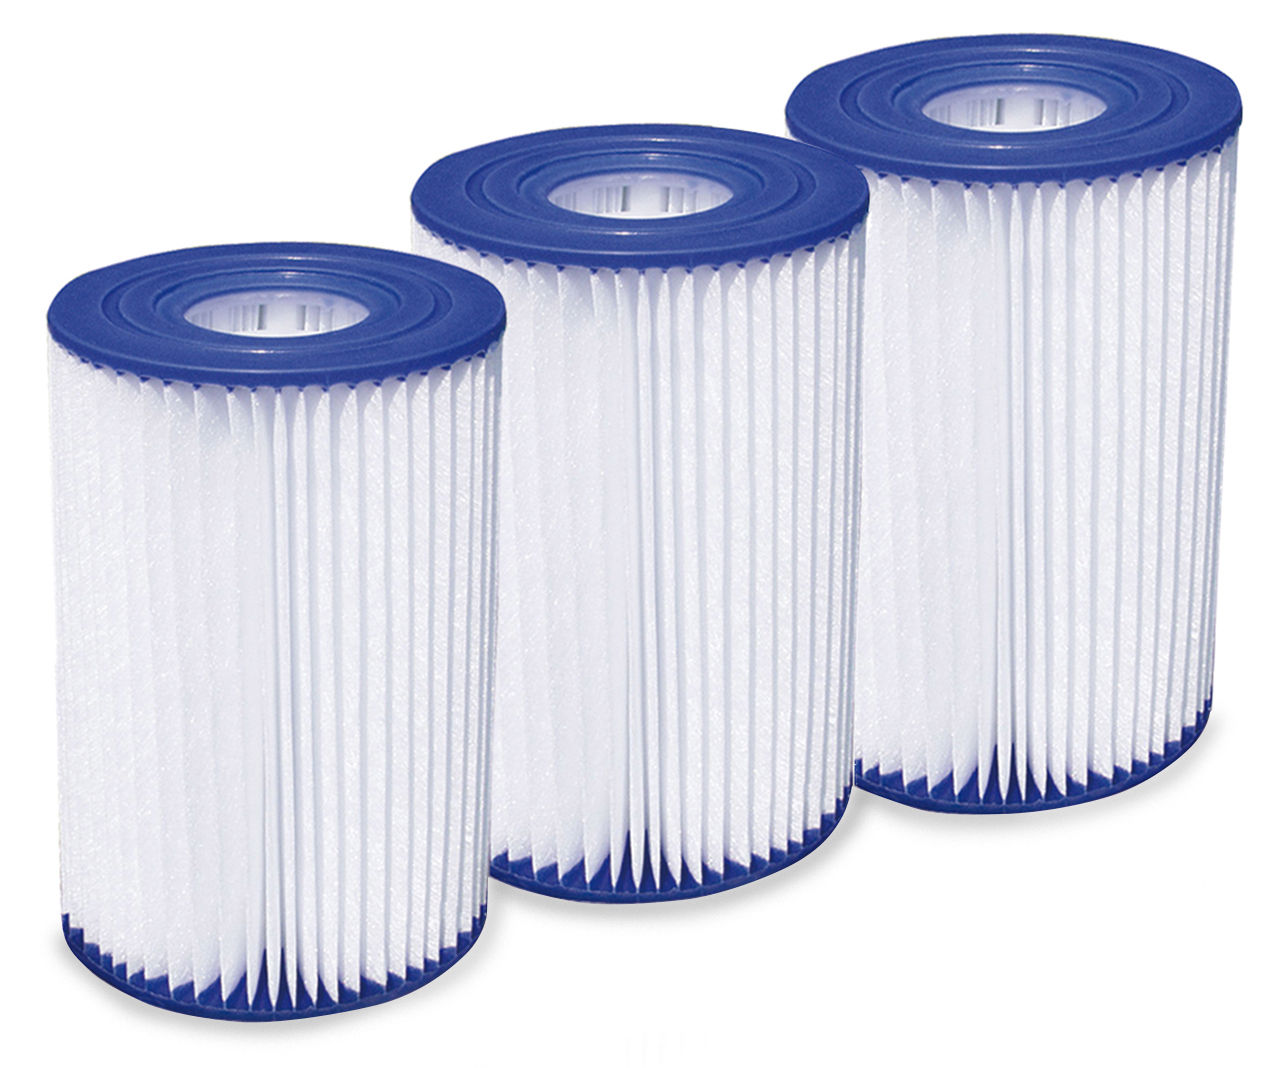 Funsicle A/C Type Pool Filter Cartridges, 3-Pack